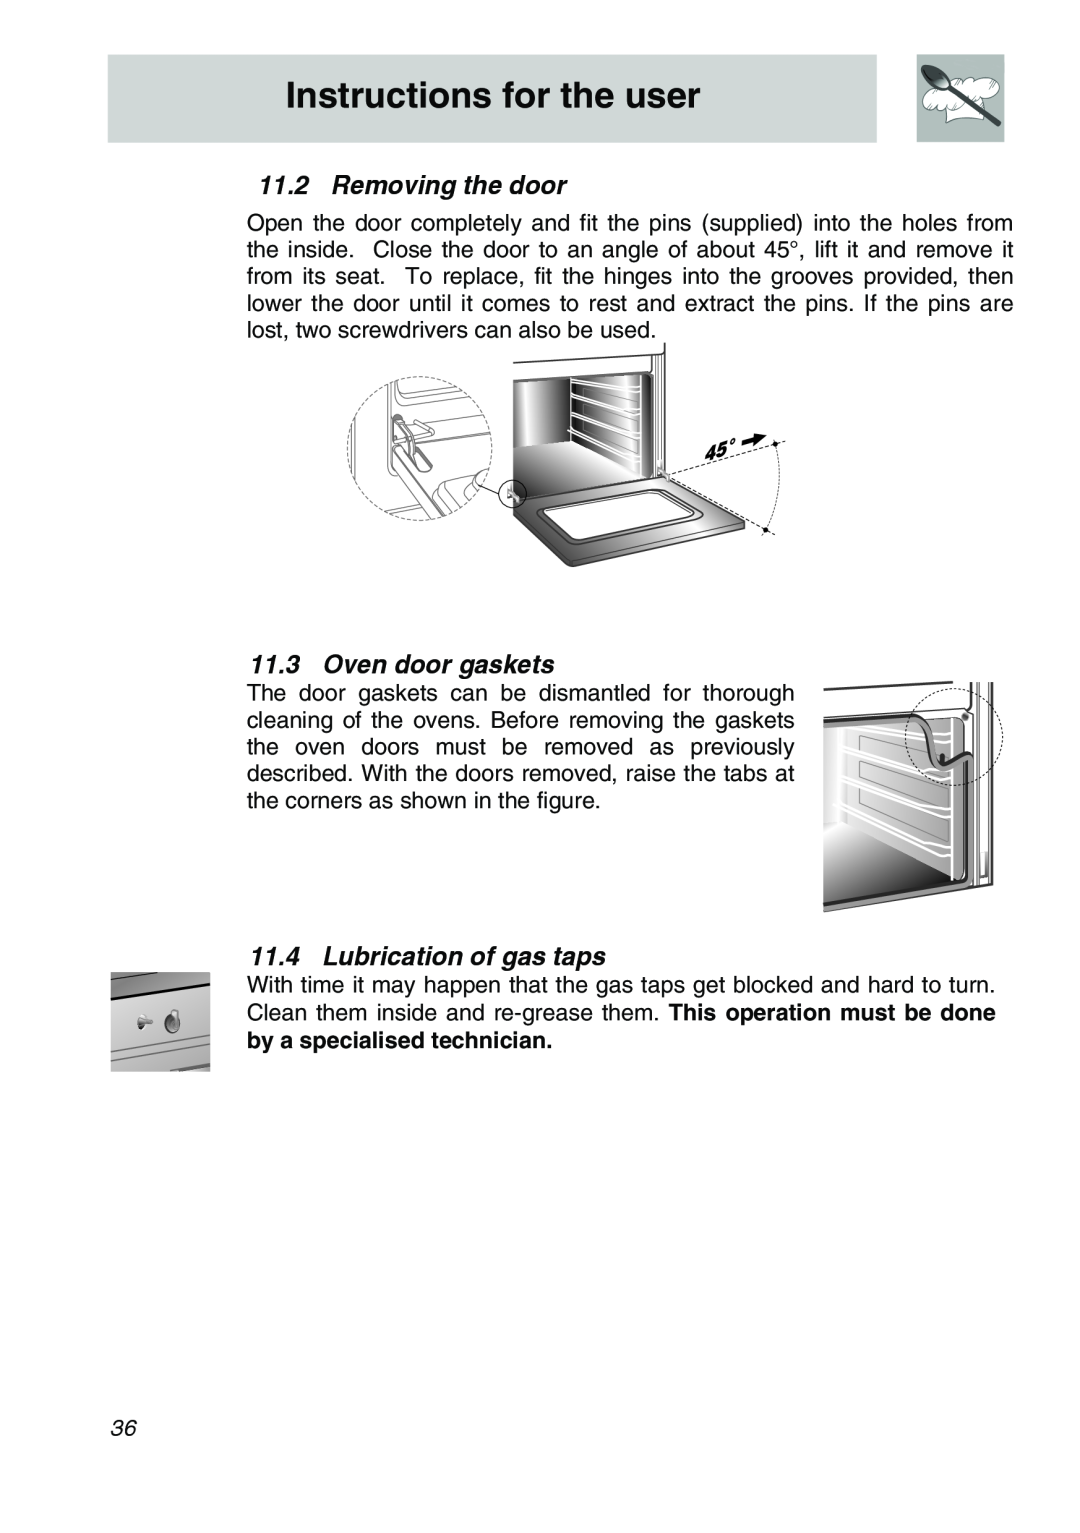 Smeg A21X-5 manual Removing the door, Oven door gaskets, Lubrication of gas taps, Instructions for the user 